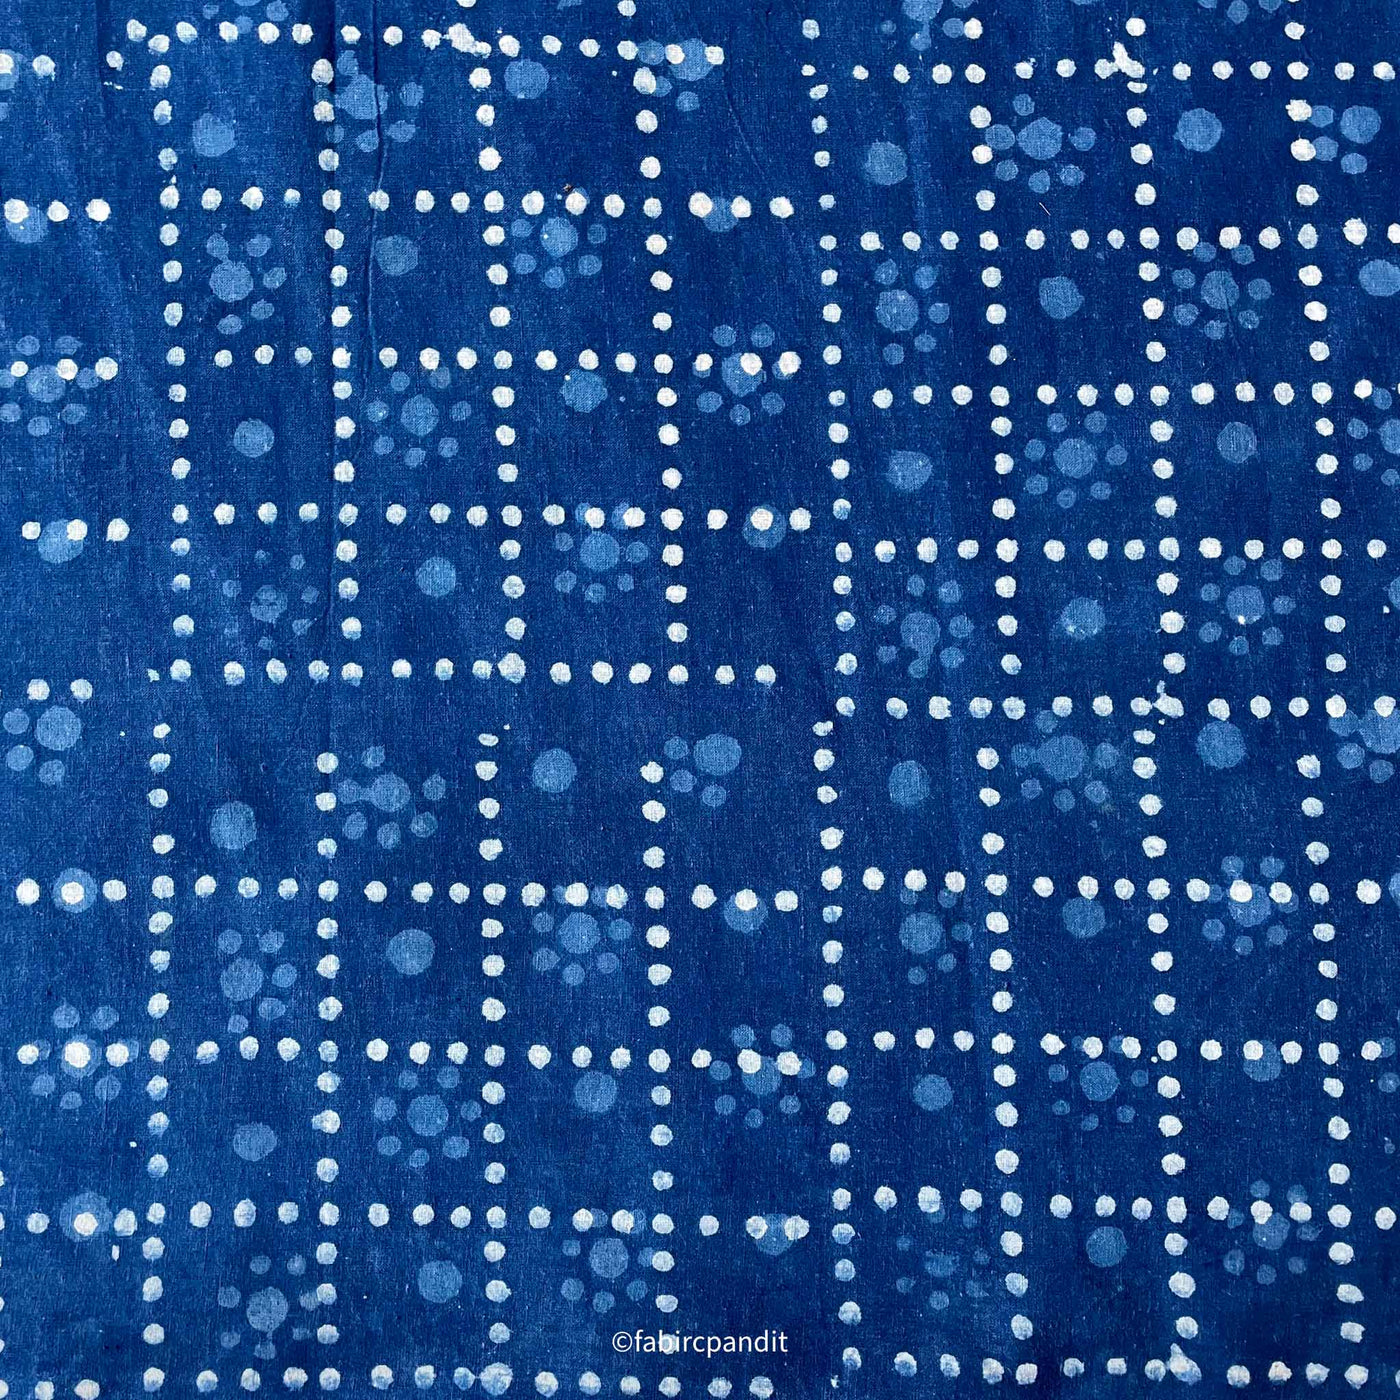 Fabric Pandit Fabric Indigo Dabu Natural Dyed Dotted Checks Hand Block Printed Pure Cotton Fabric (Width 43 inches)